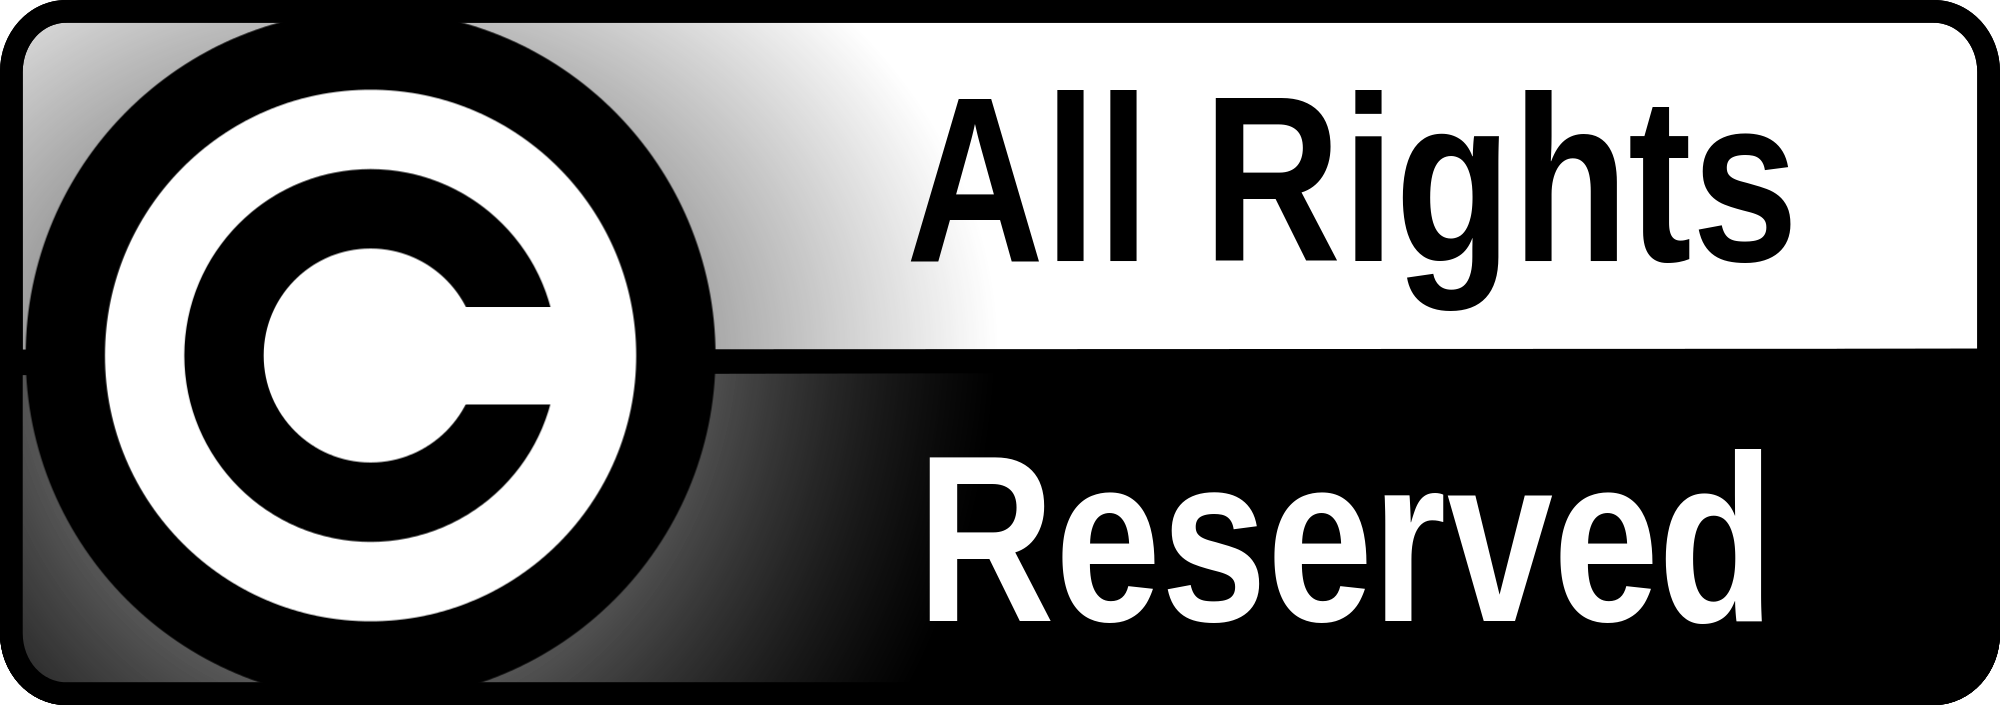 Copyright All Rights Reserved Symbol PNG File pngteam.com